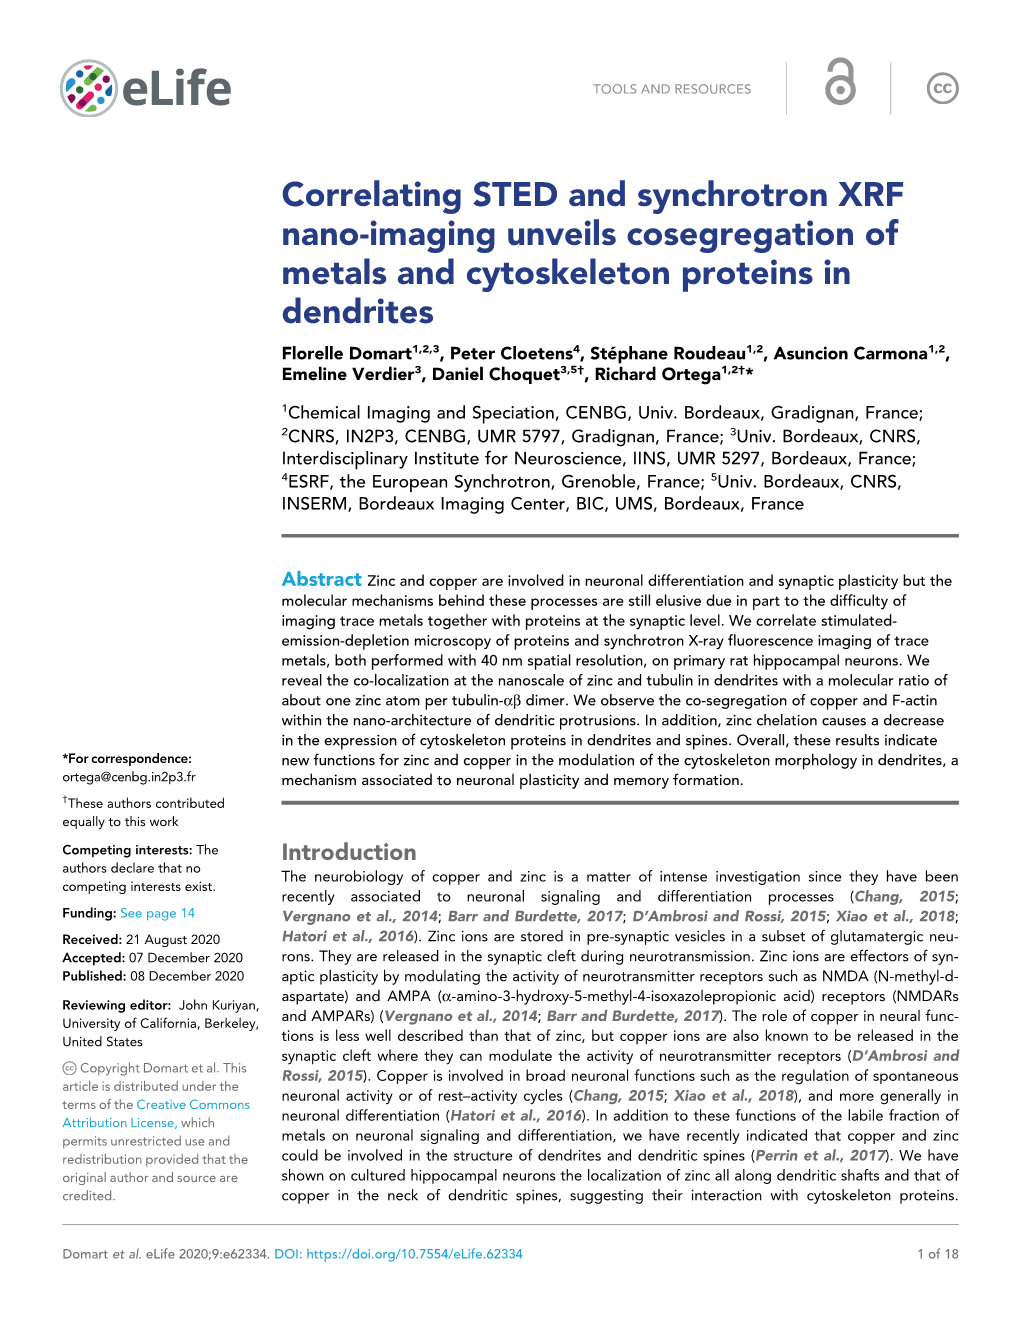 Correlating STED and Synchrotron XRF Nano-Imaging Unveils